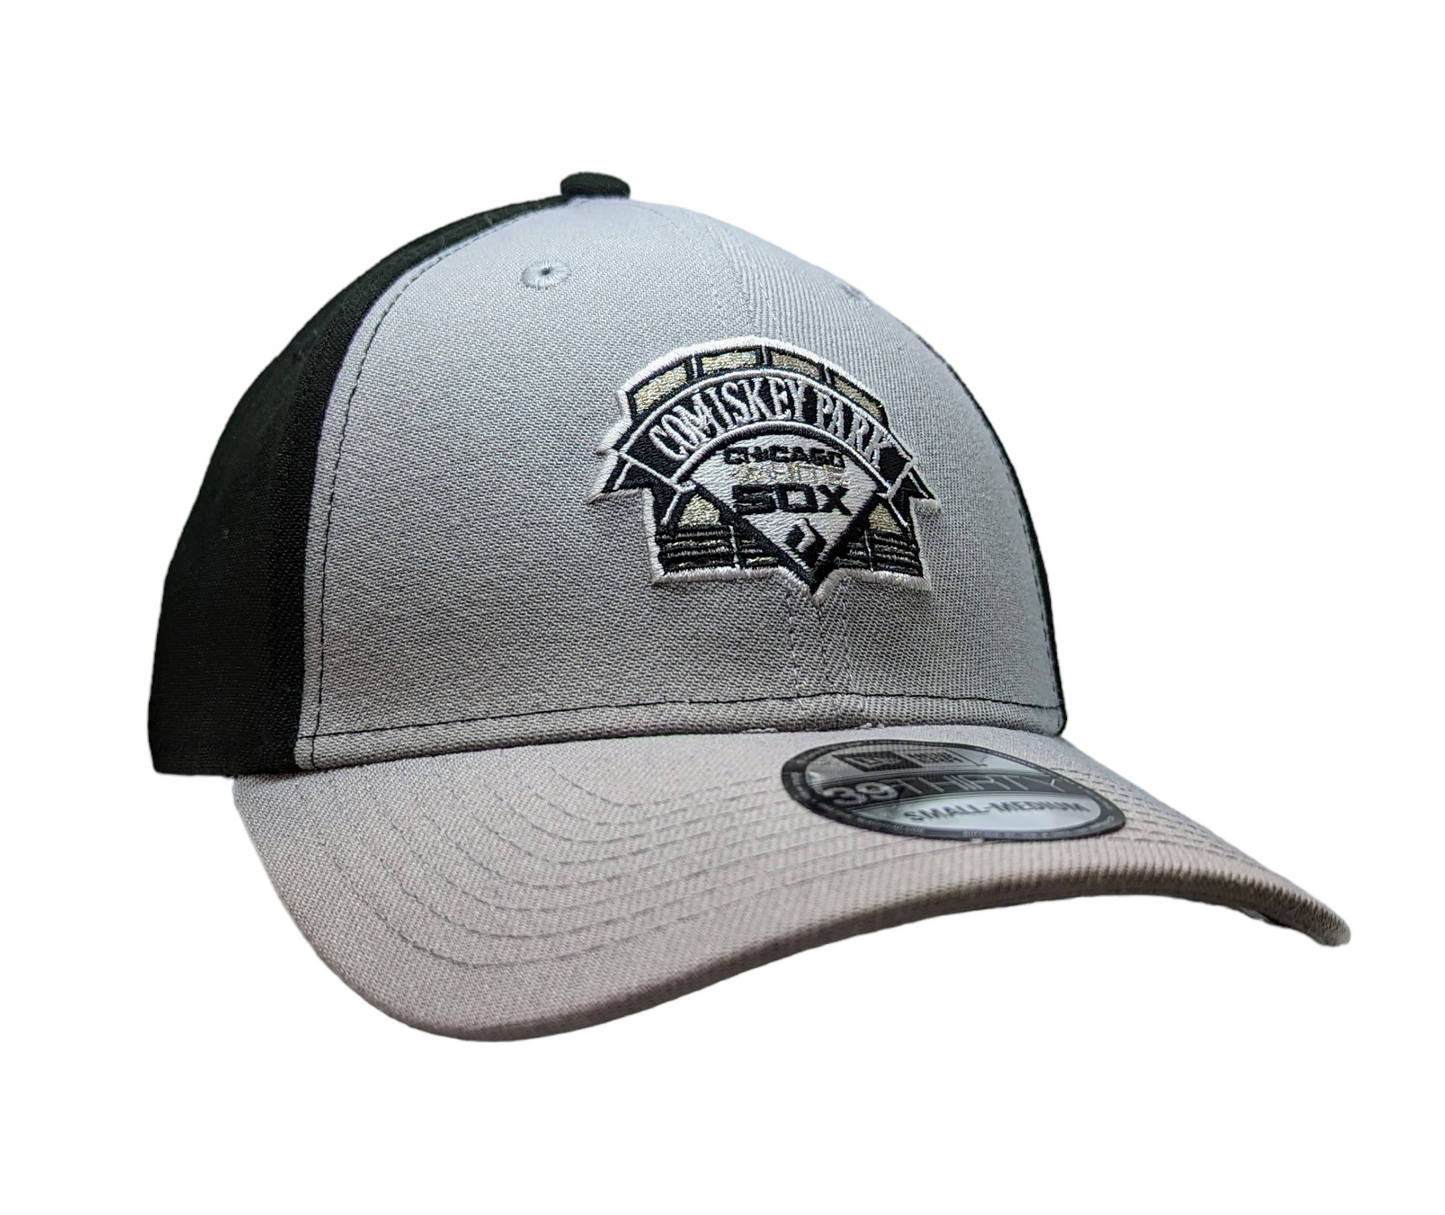 Chicago White Sox Comiskey Park Cooperstown Collection Grey/Black 39THIRTY Flex Fit New Era Hat